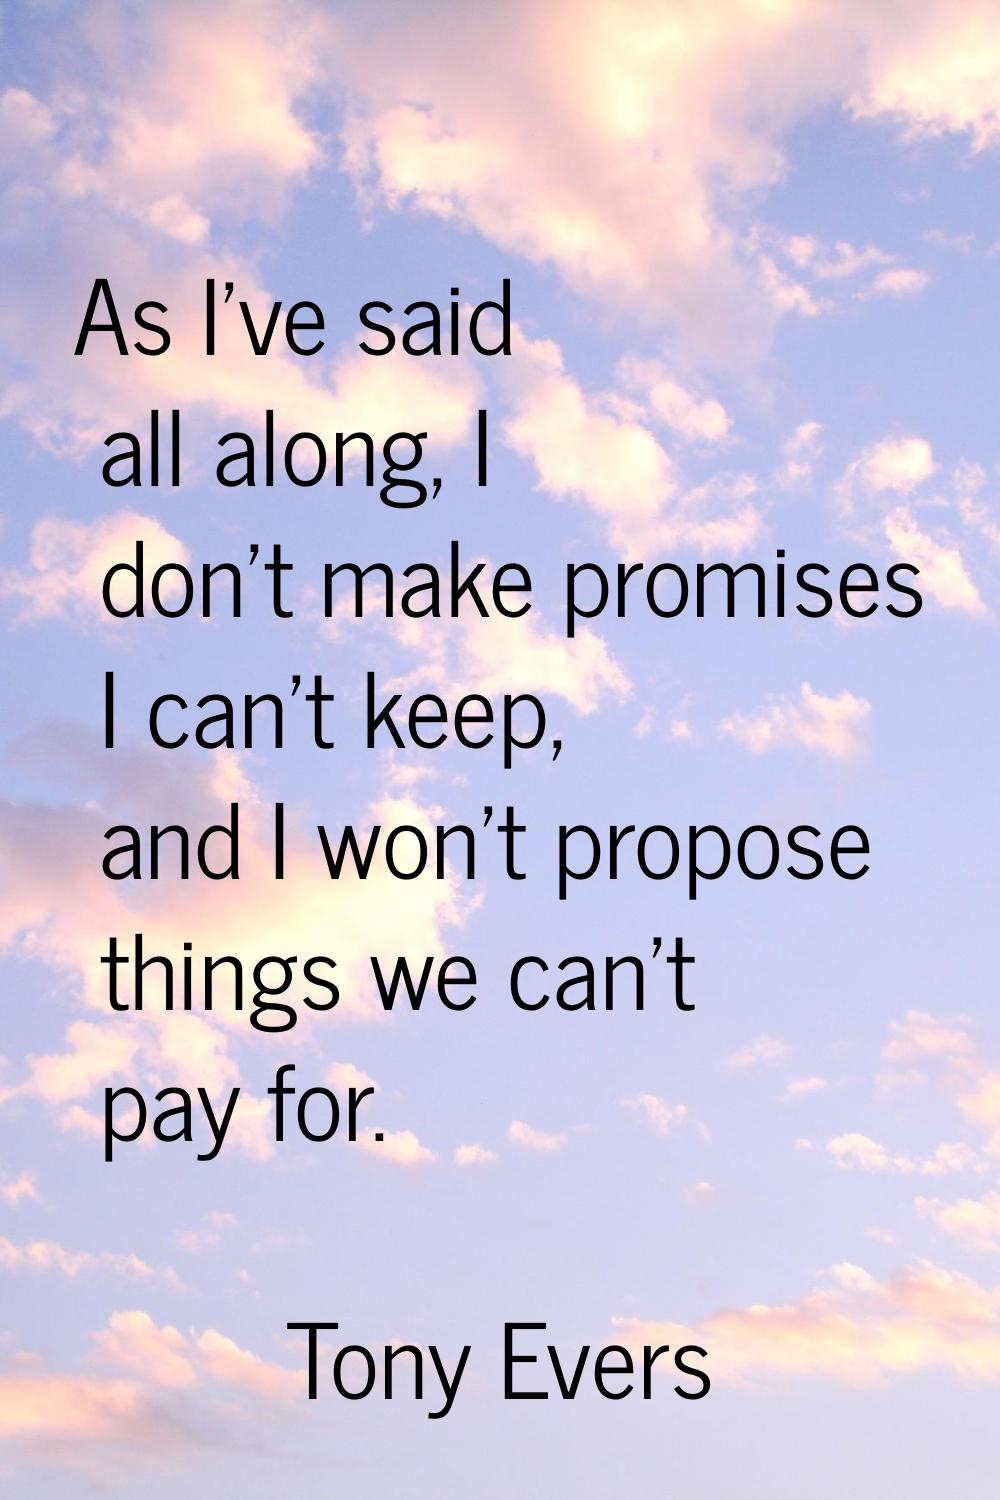 As I've said all along, I don't make promises I can't keep, and I won't propose things we can't pay